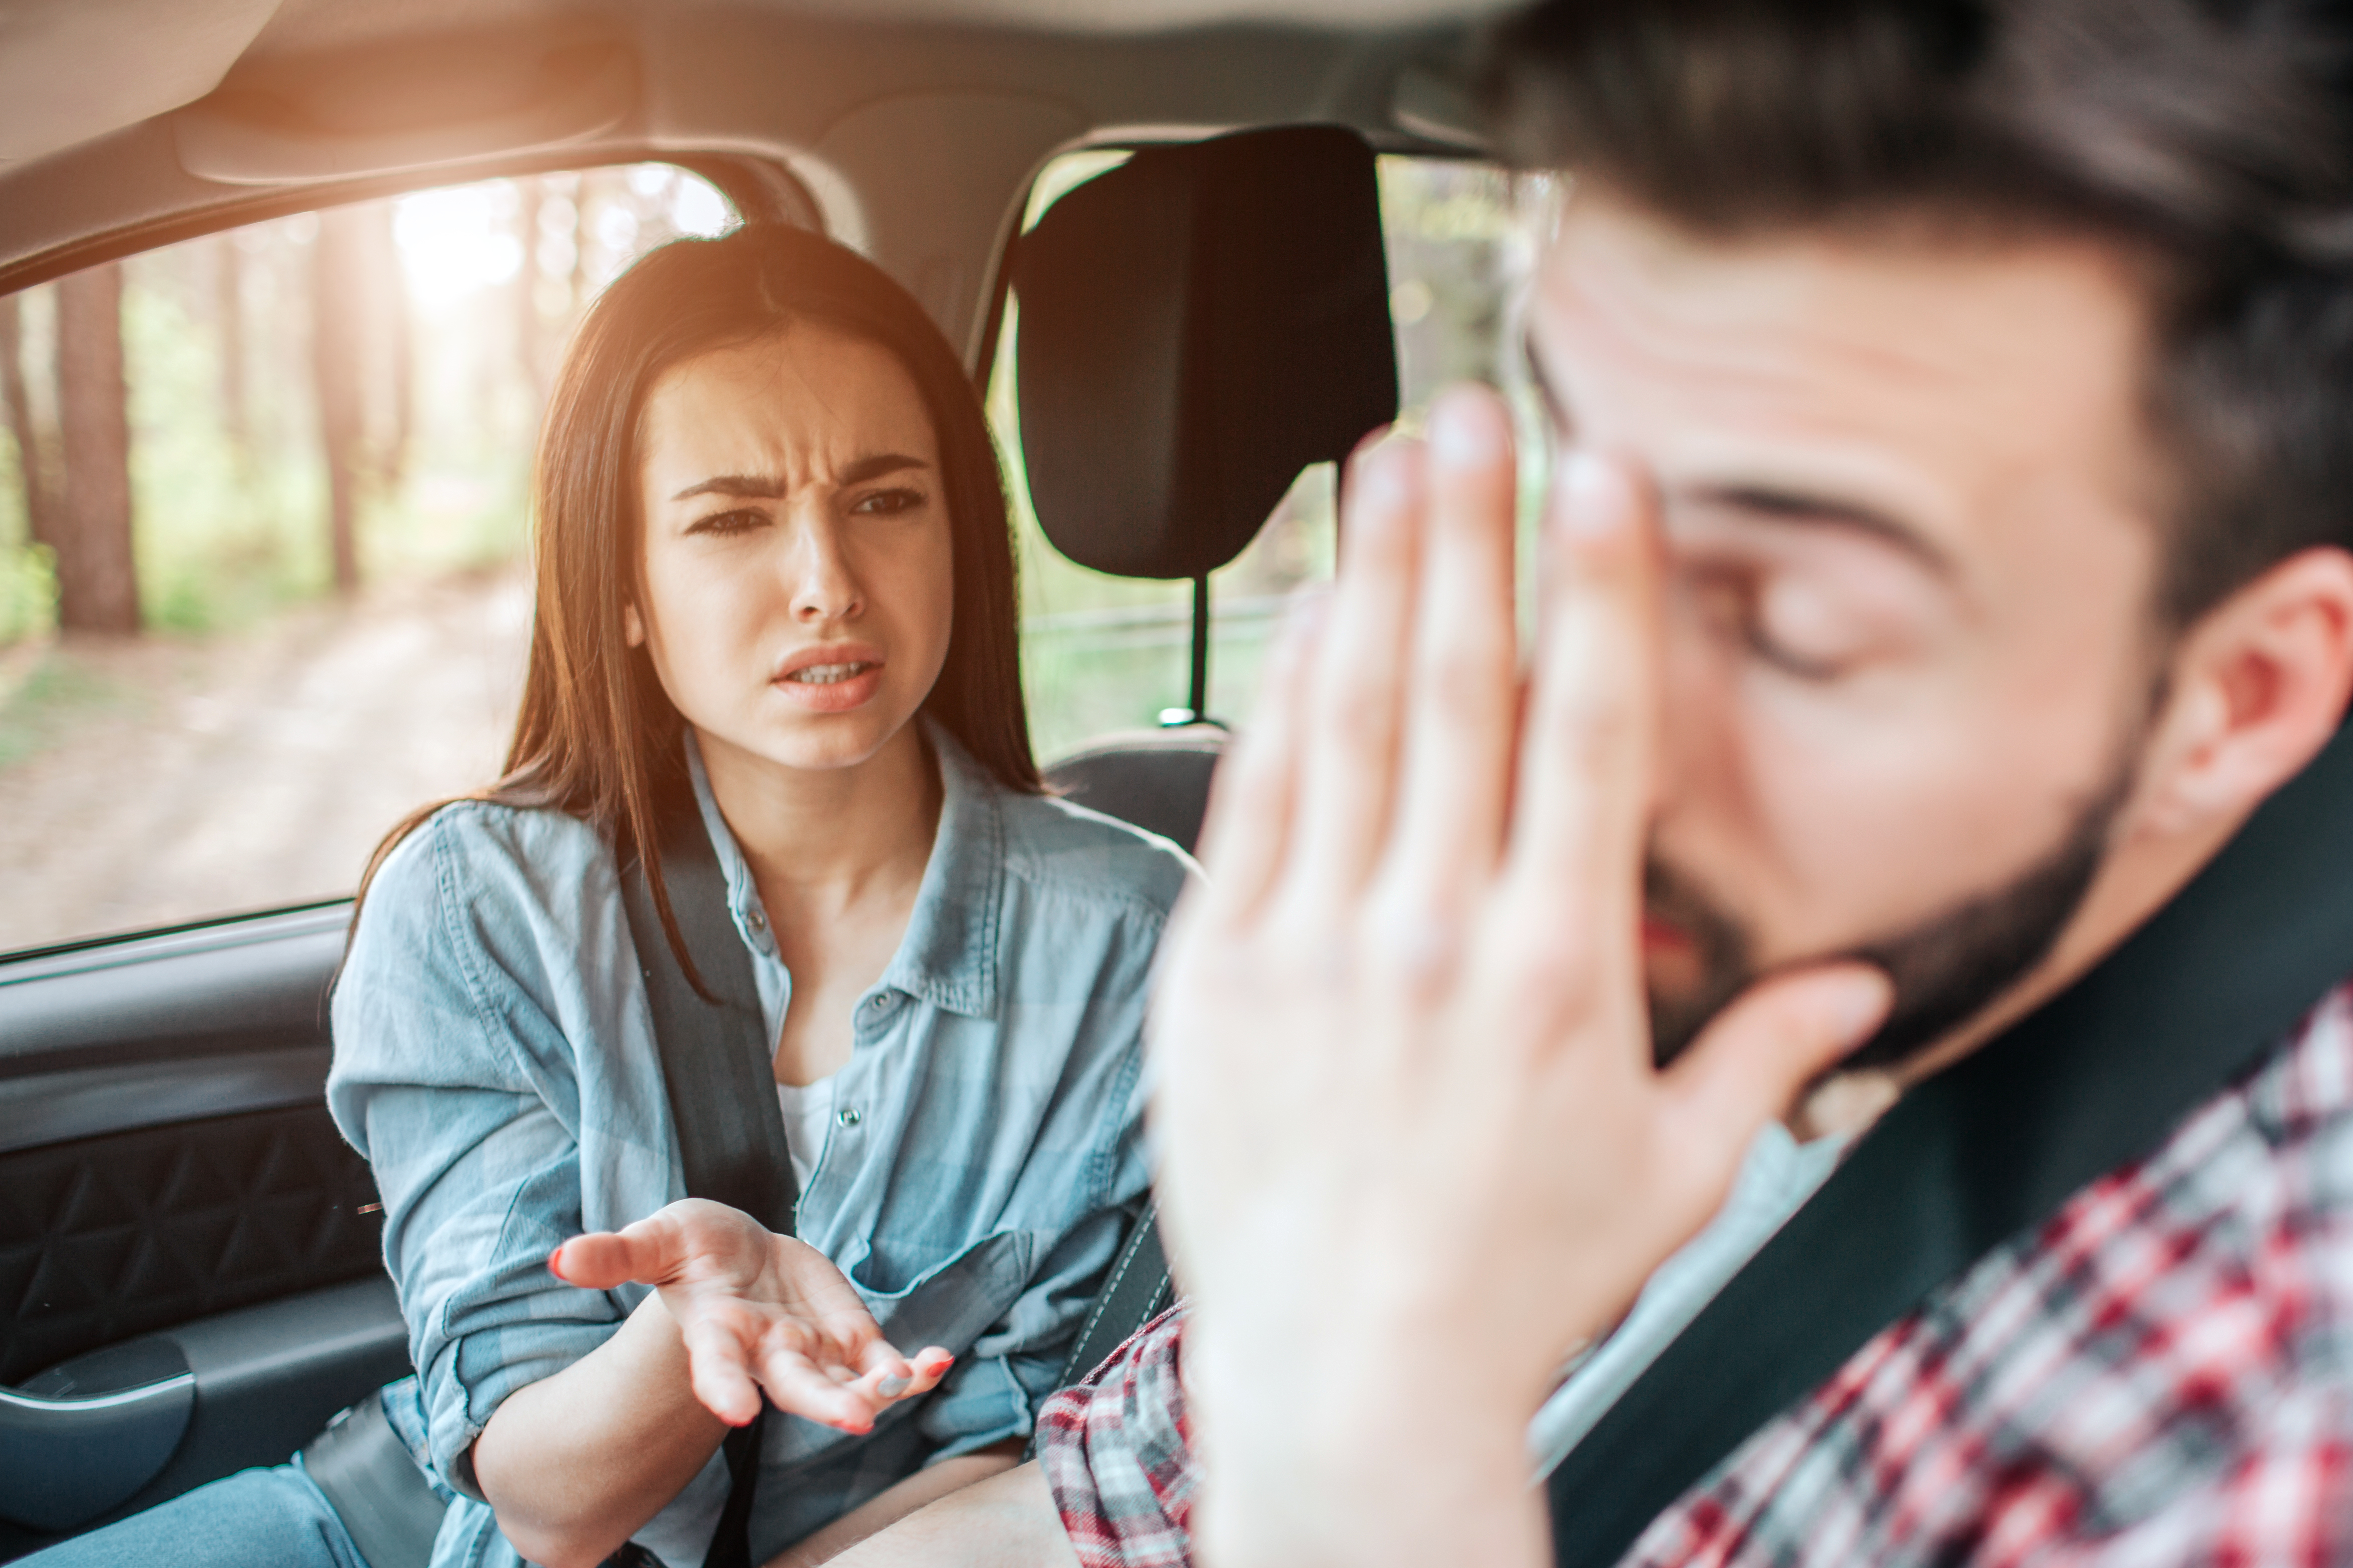 A couple arguing in the car | Source: Shutterstock